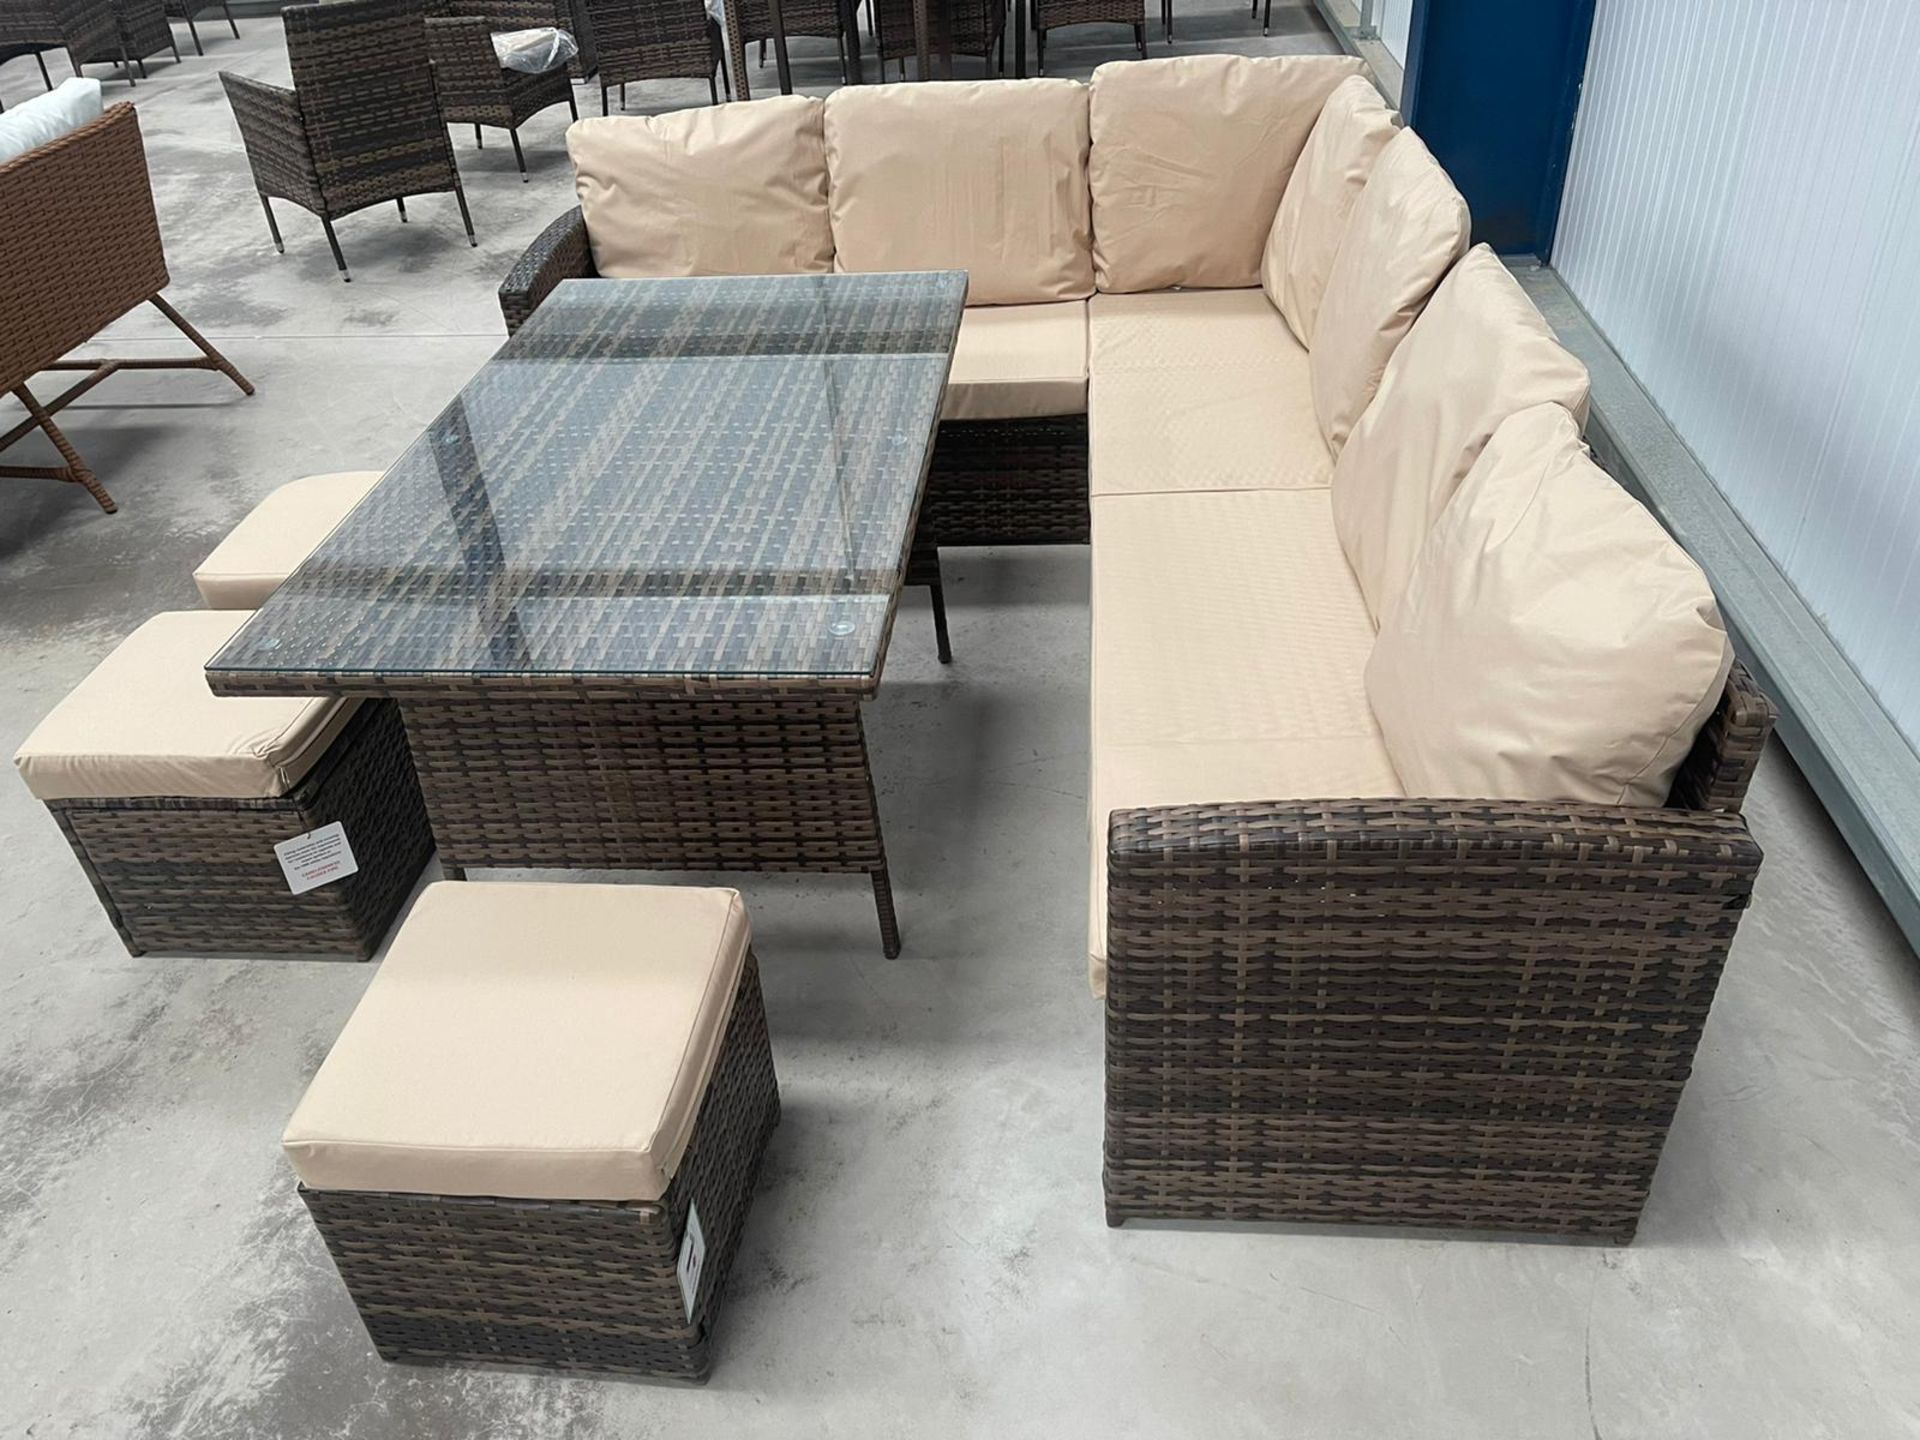 RRP £1299 - NEW BROWN 9 SEATER CORNER SOFA DINING SET WITH THREE STOOL AND GLASSED TOP TABLE. - Image 5 of 5